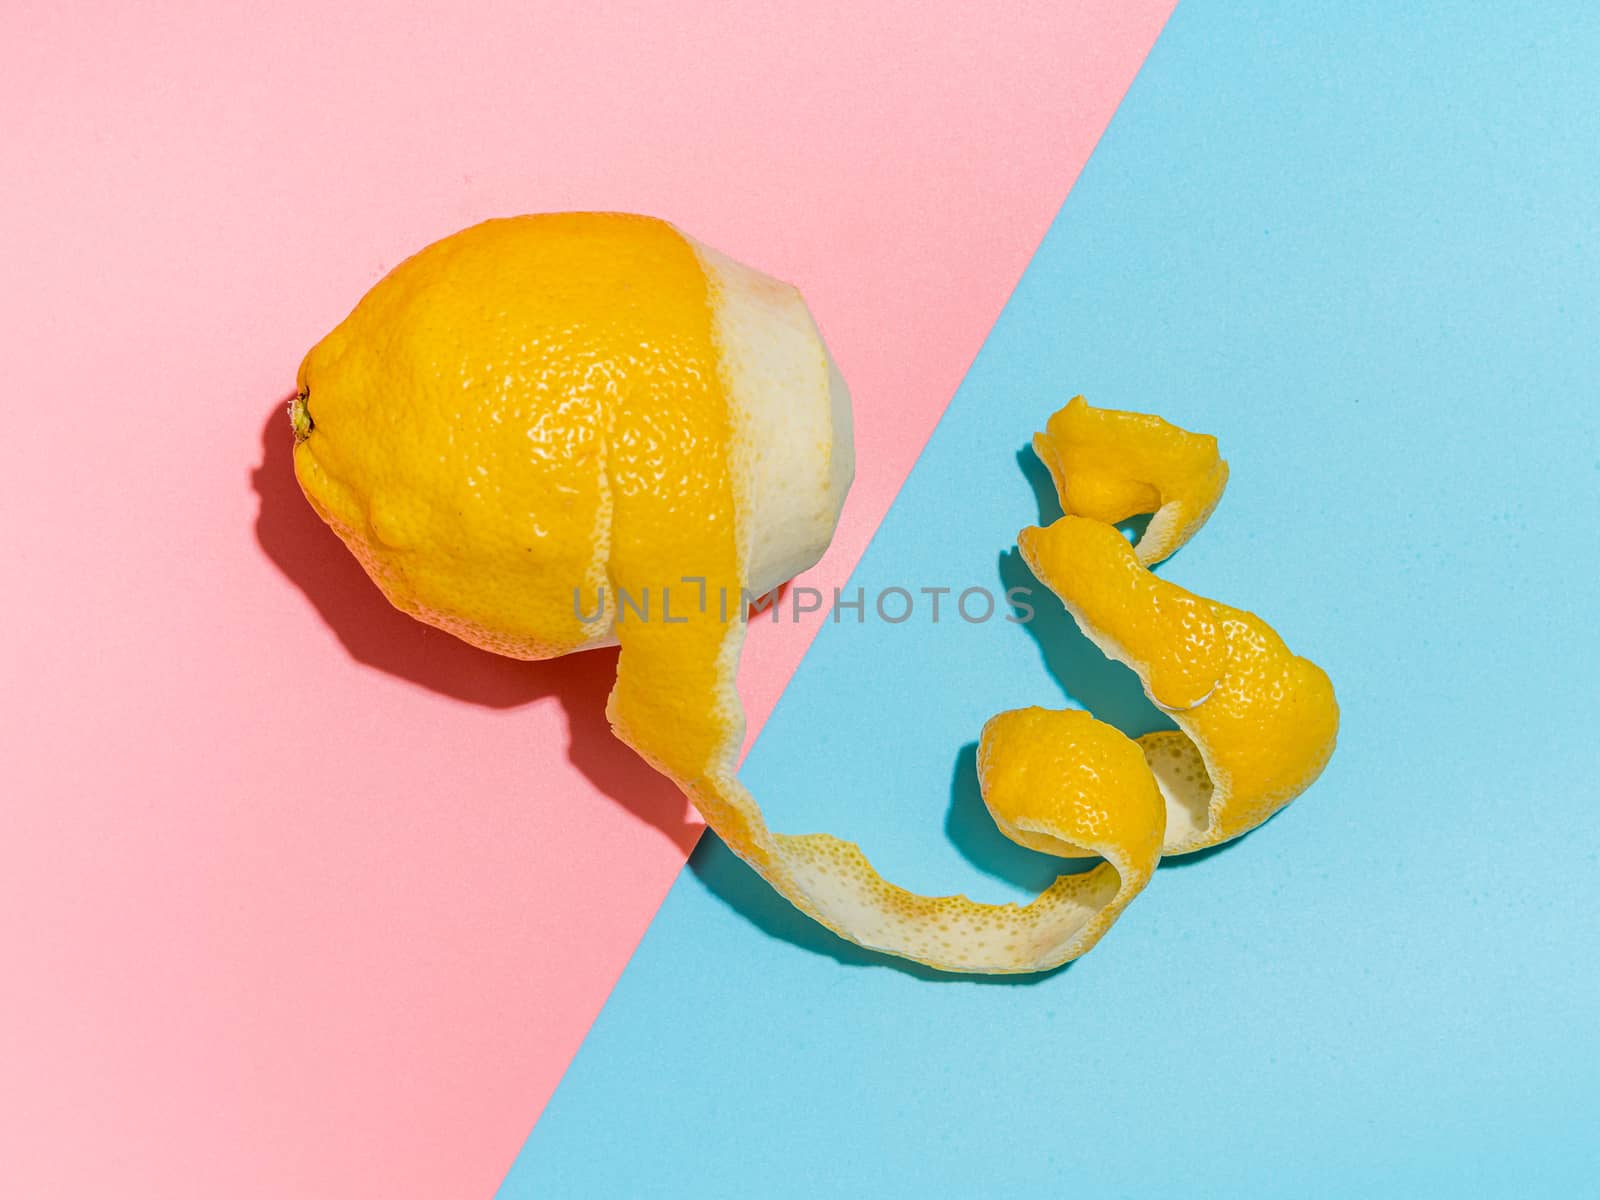 Lemon with spiral peeled zest over blue and pink minimalistic background. Lemon and peel in hard light. Top view or flat lay. Summer minimalistic creative concept and layout